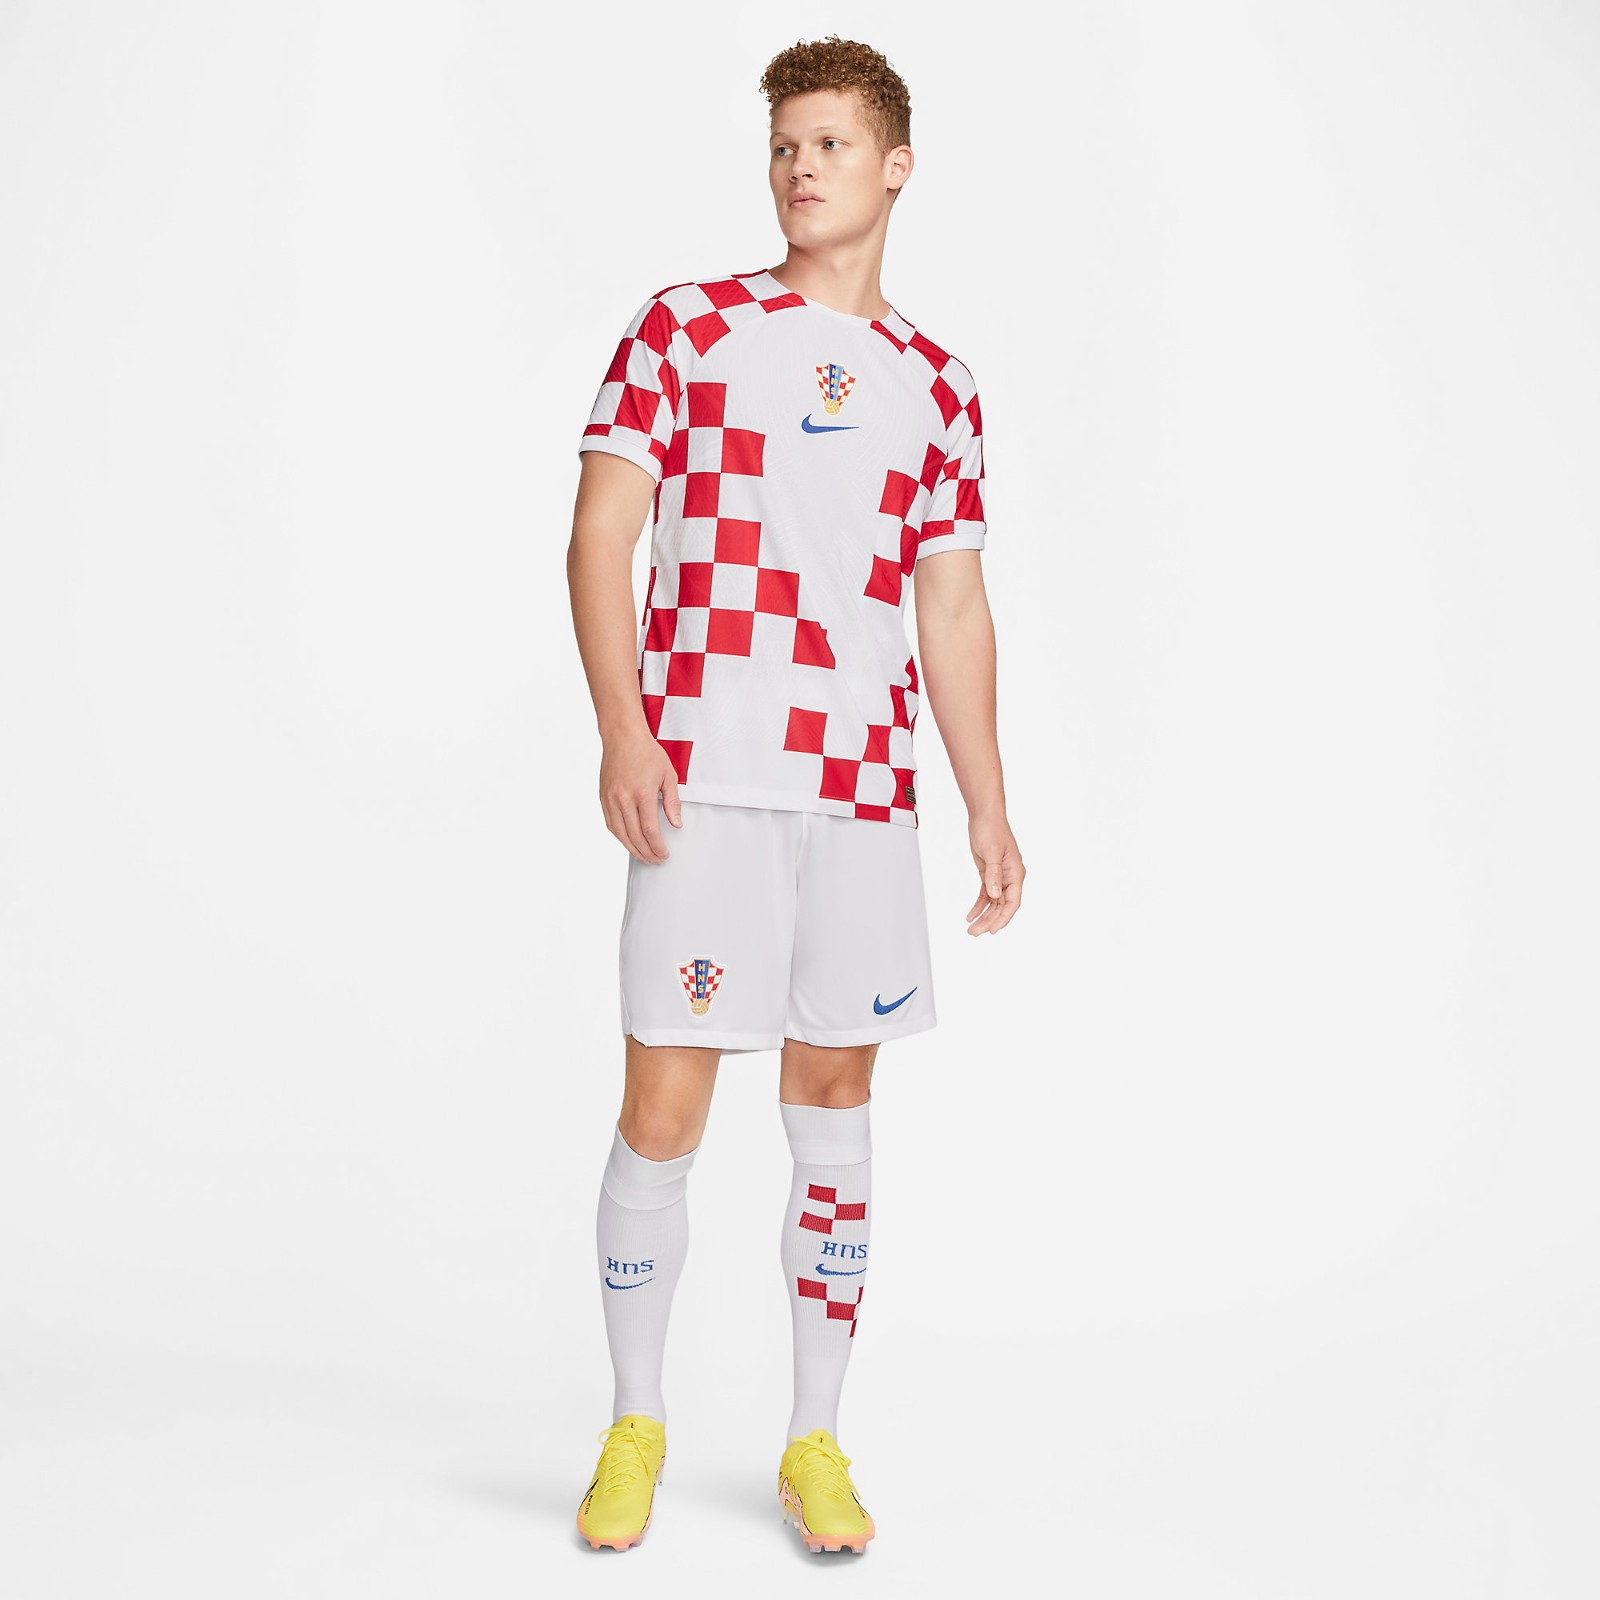 Croatia FIFA World Cup 2022 Home Kit Full With Shorts and Socks